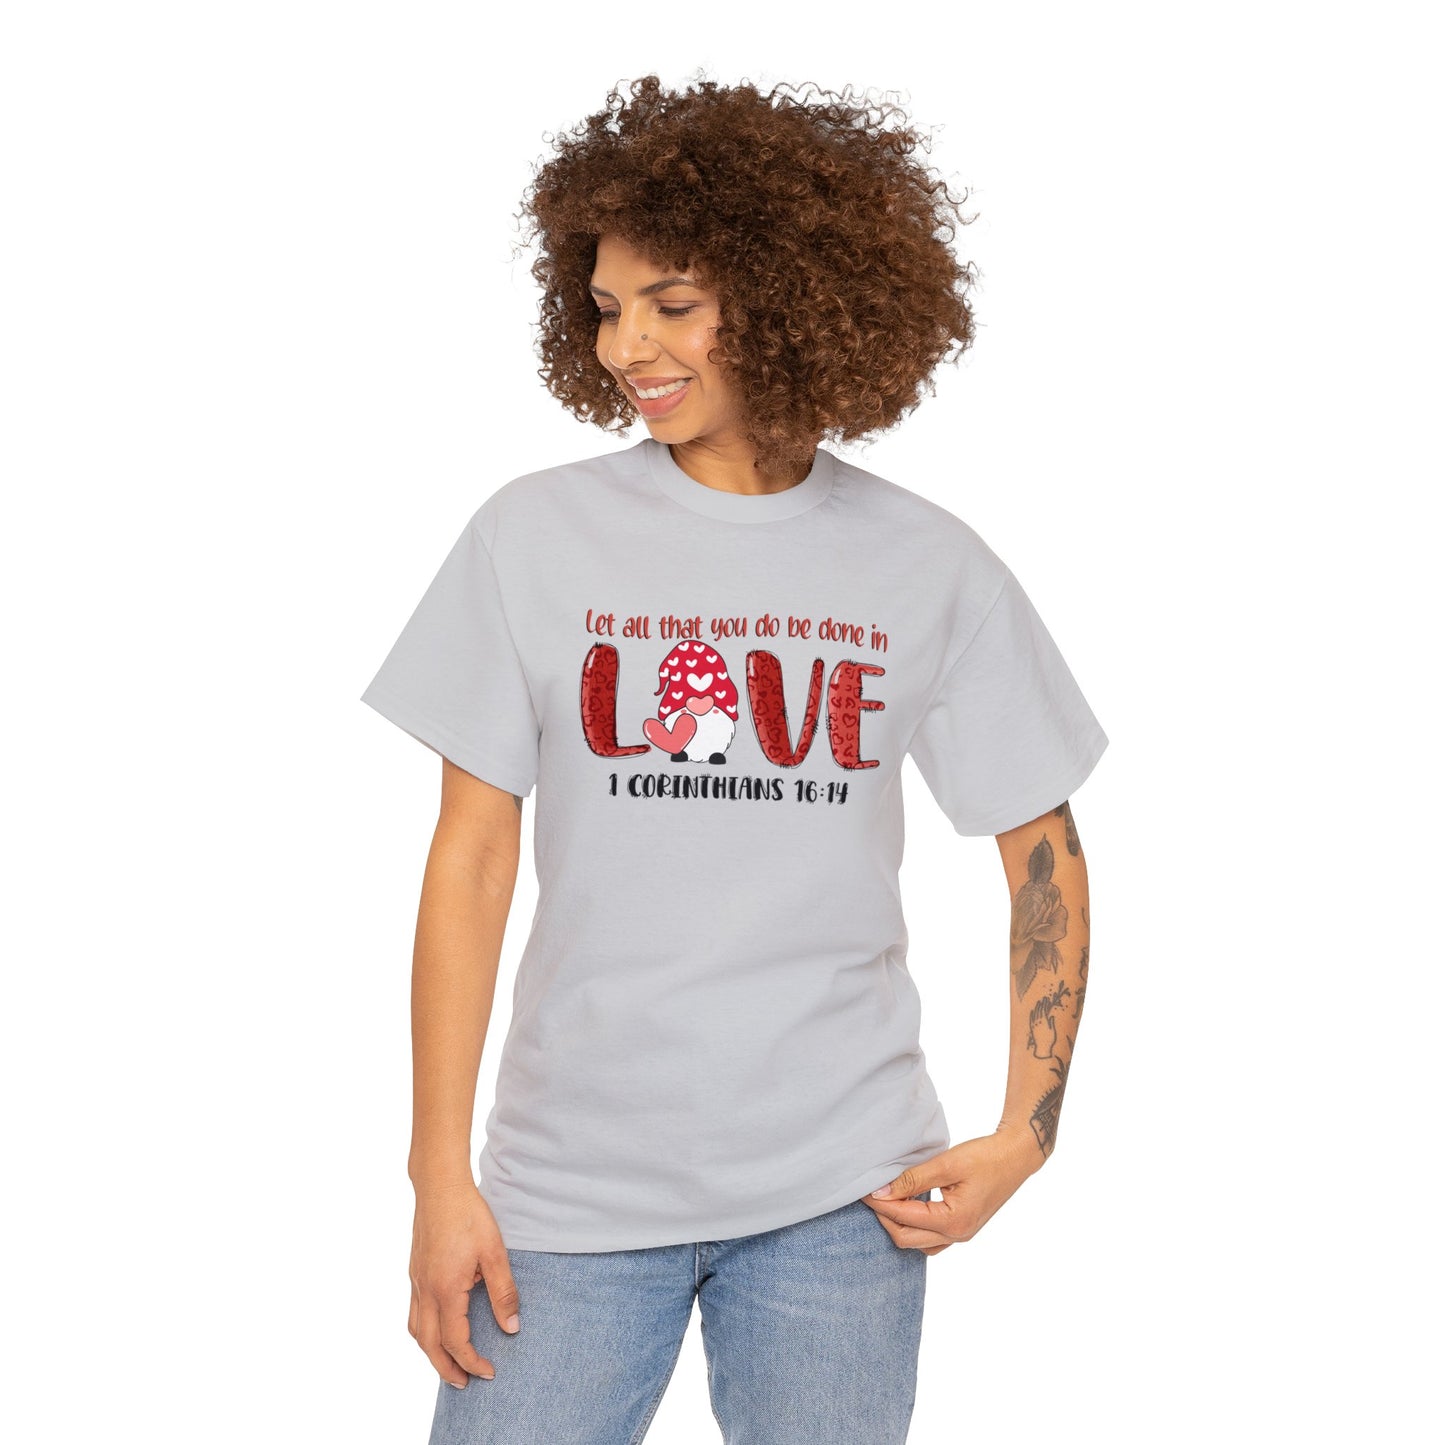 Let all you do be done in love - Gildan Unisex Heavy Cotton Tee